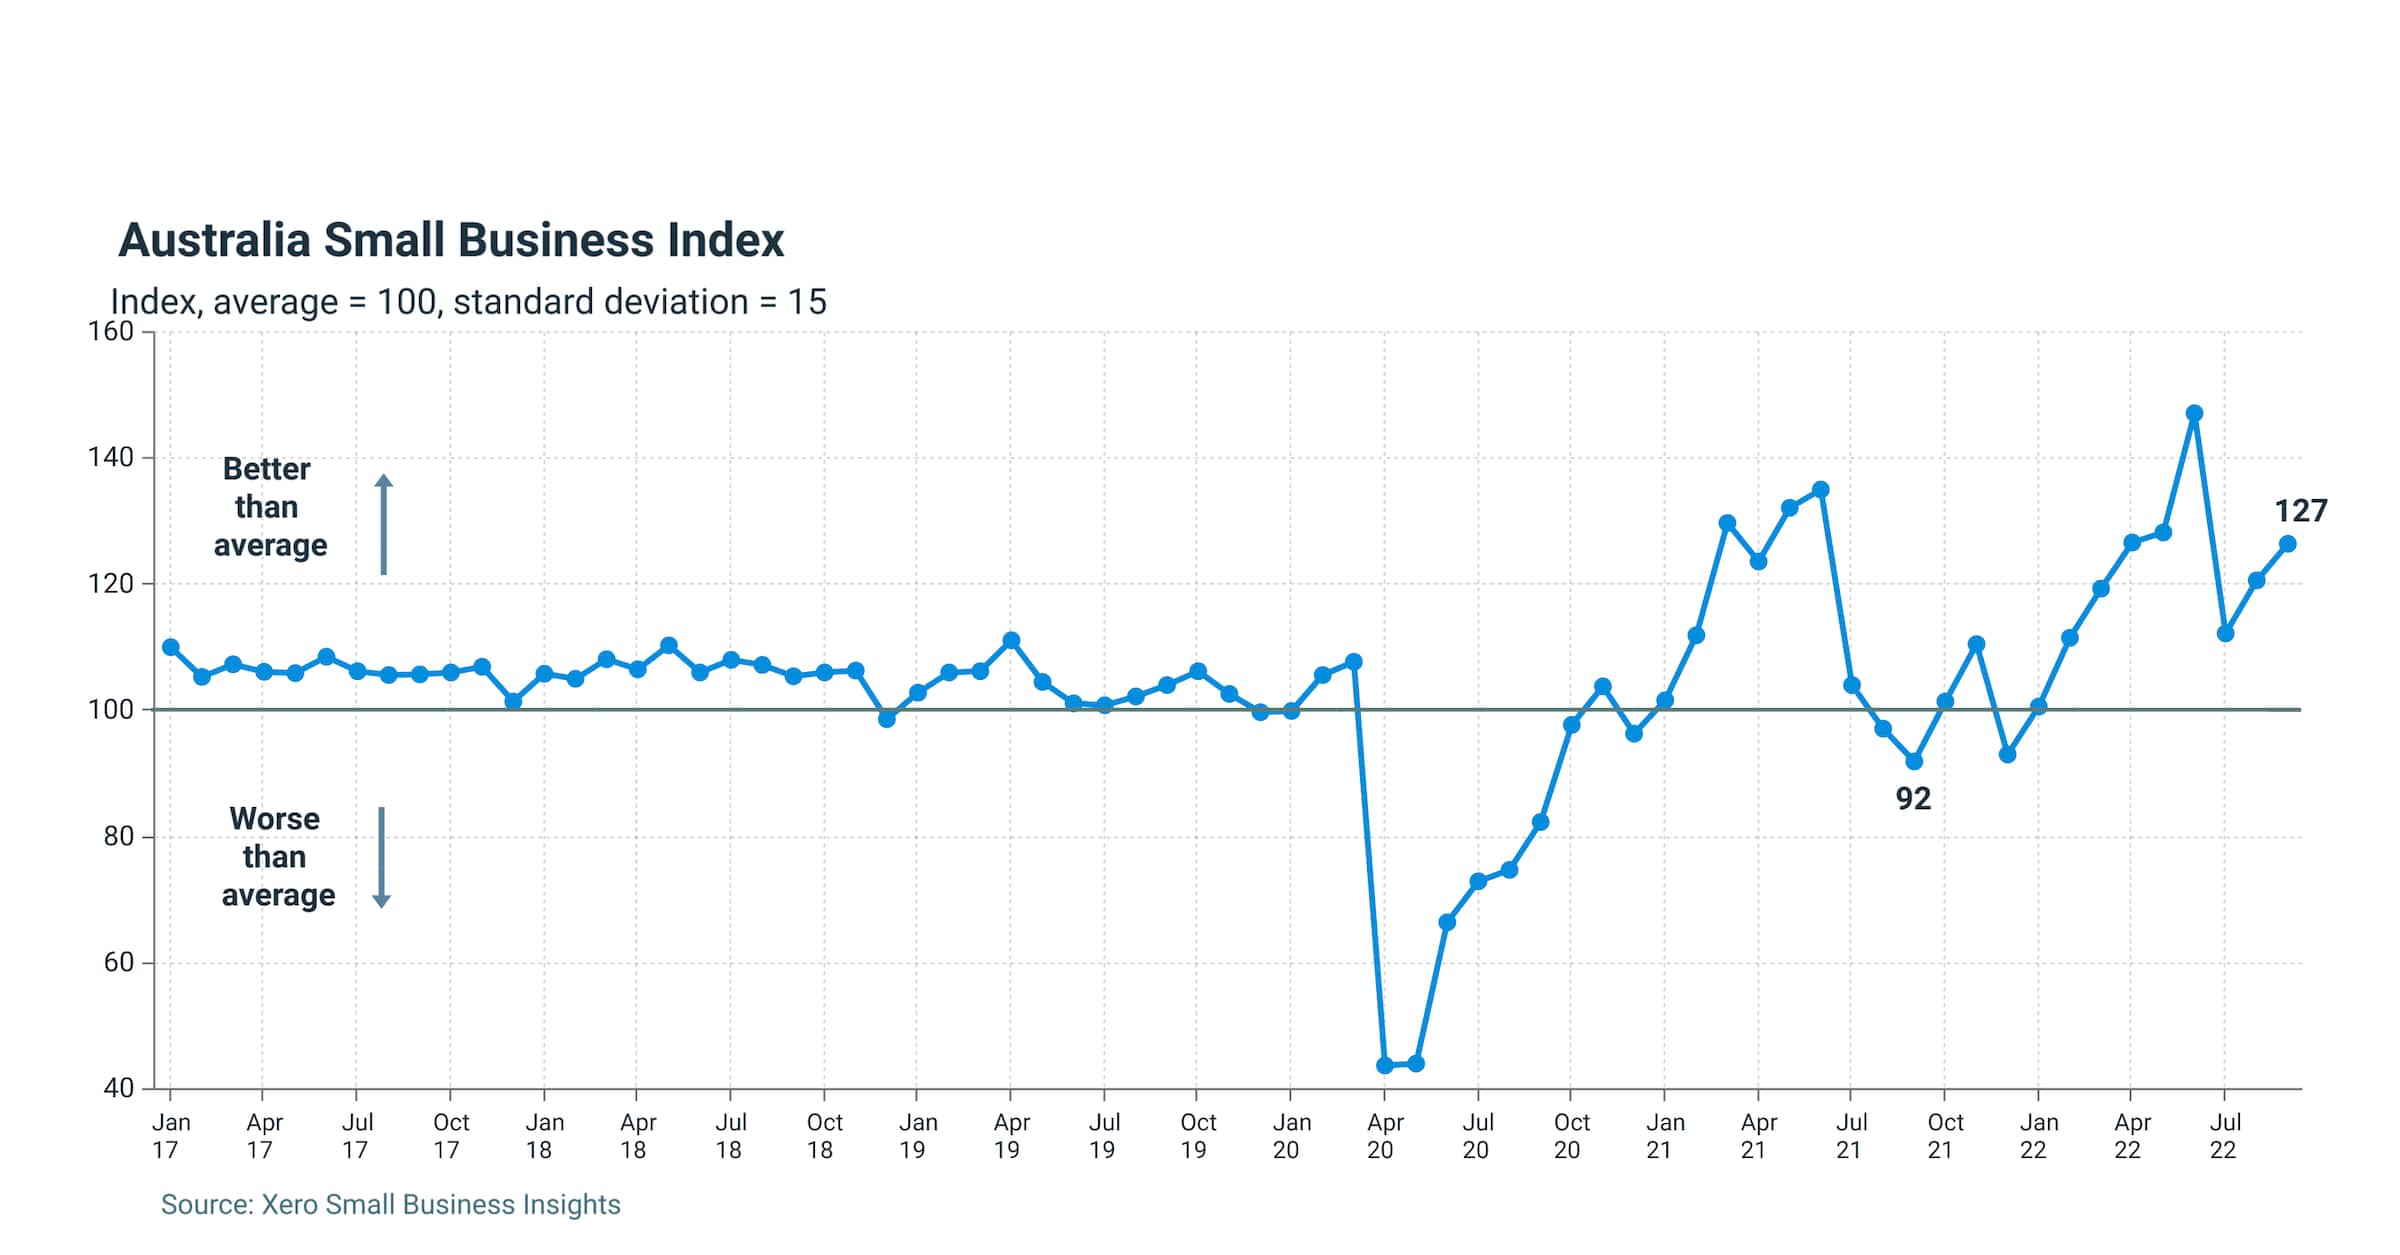 Graph of Australia Small Business Index showing an increase of 6 points